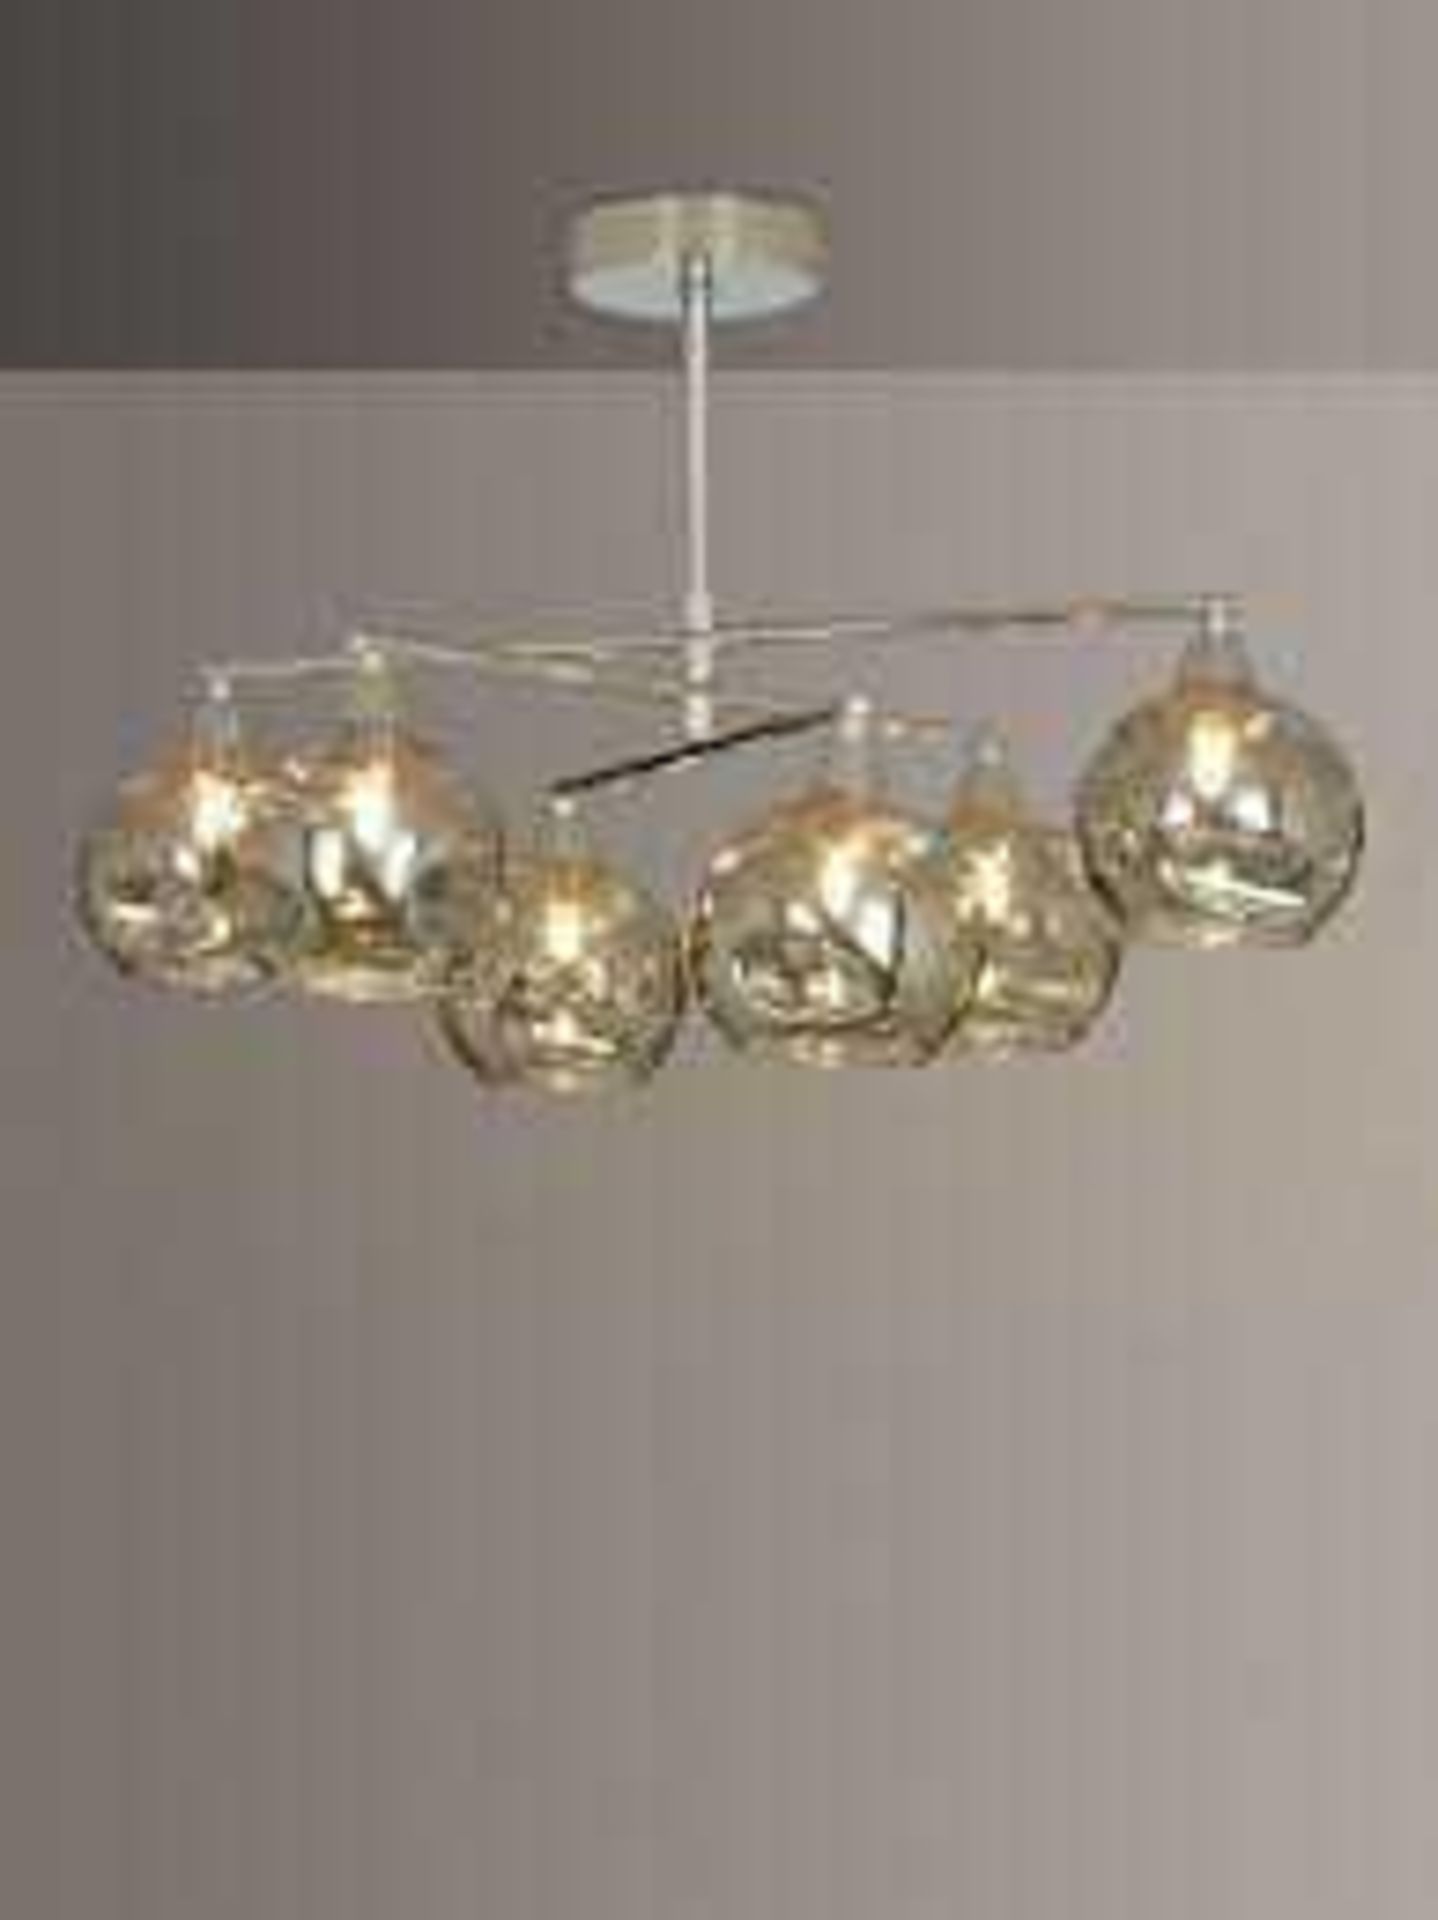 RRP £75 Boxed John Lewis And Partners Susa 6 Light Semi Flush Ceiling Light 536207 (Appraisals Are